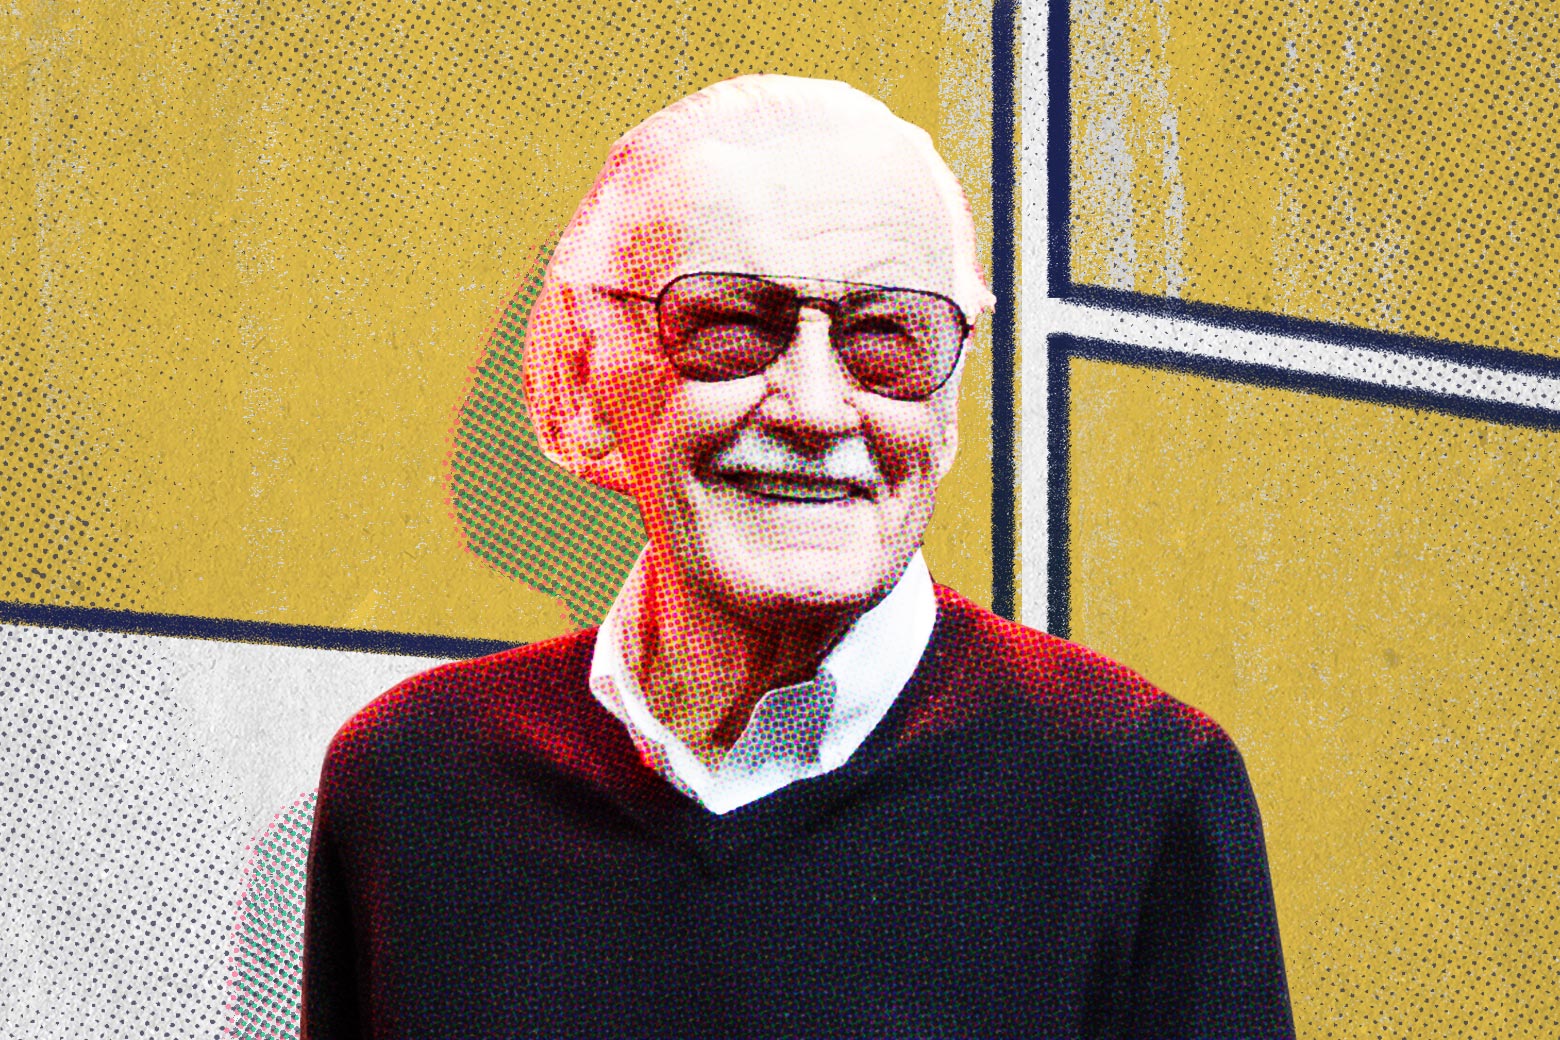 Stan Lee in his trademark glasses smiling, with comic-book panels illustrated behind him